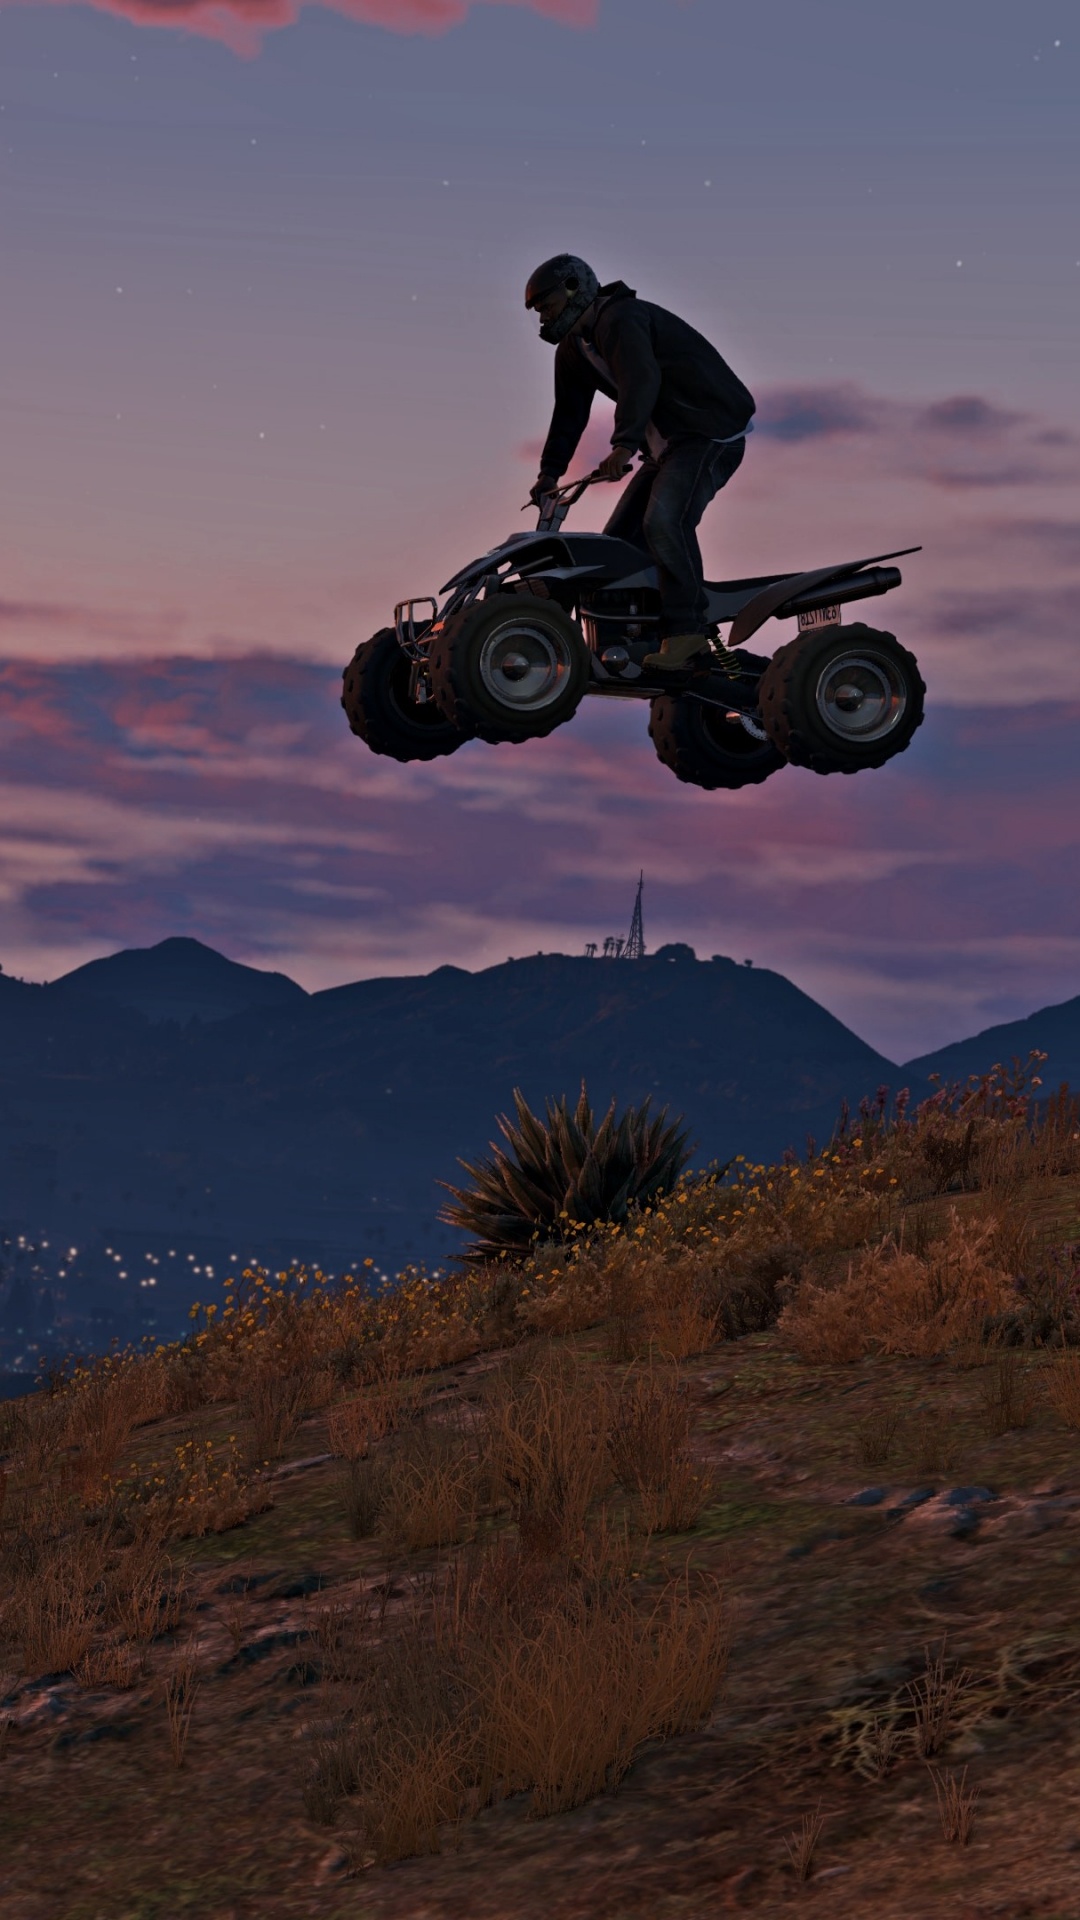 Grand Theft Auto v, Rockstar Games, Extreme Sport, Playstation 4, Mountain. Wallpaper in 1080x1920 Resolution